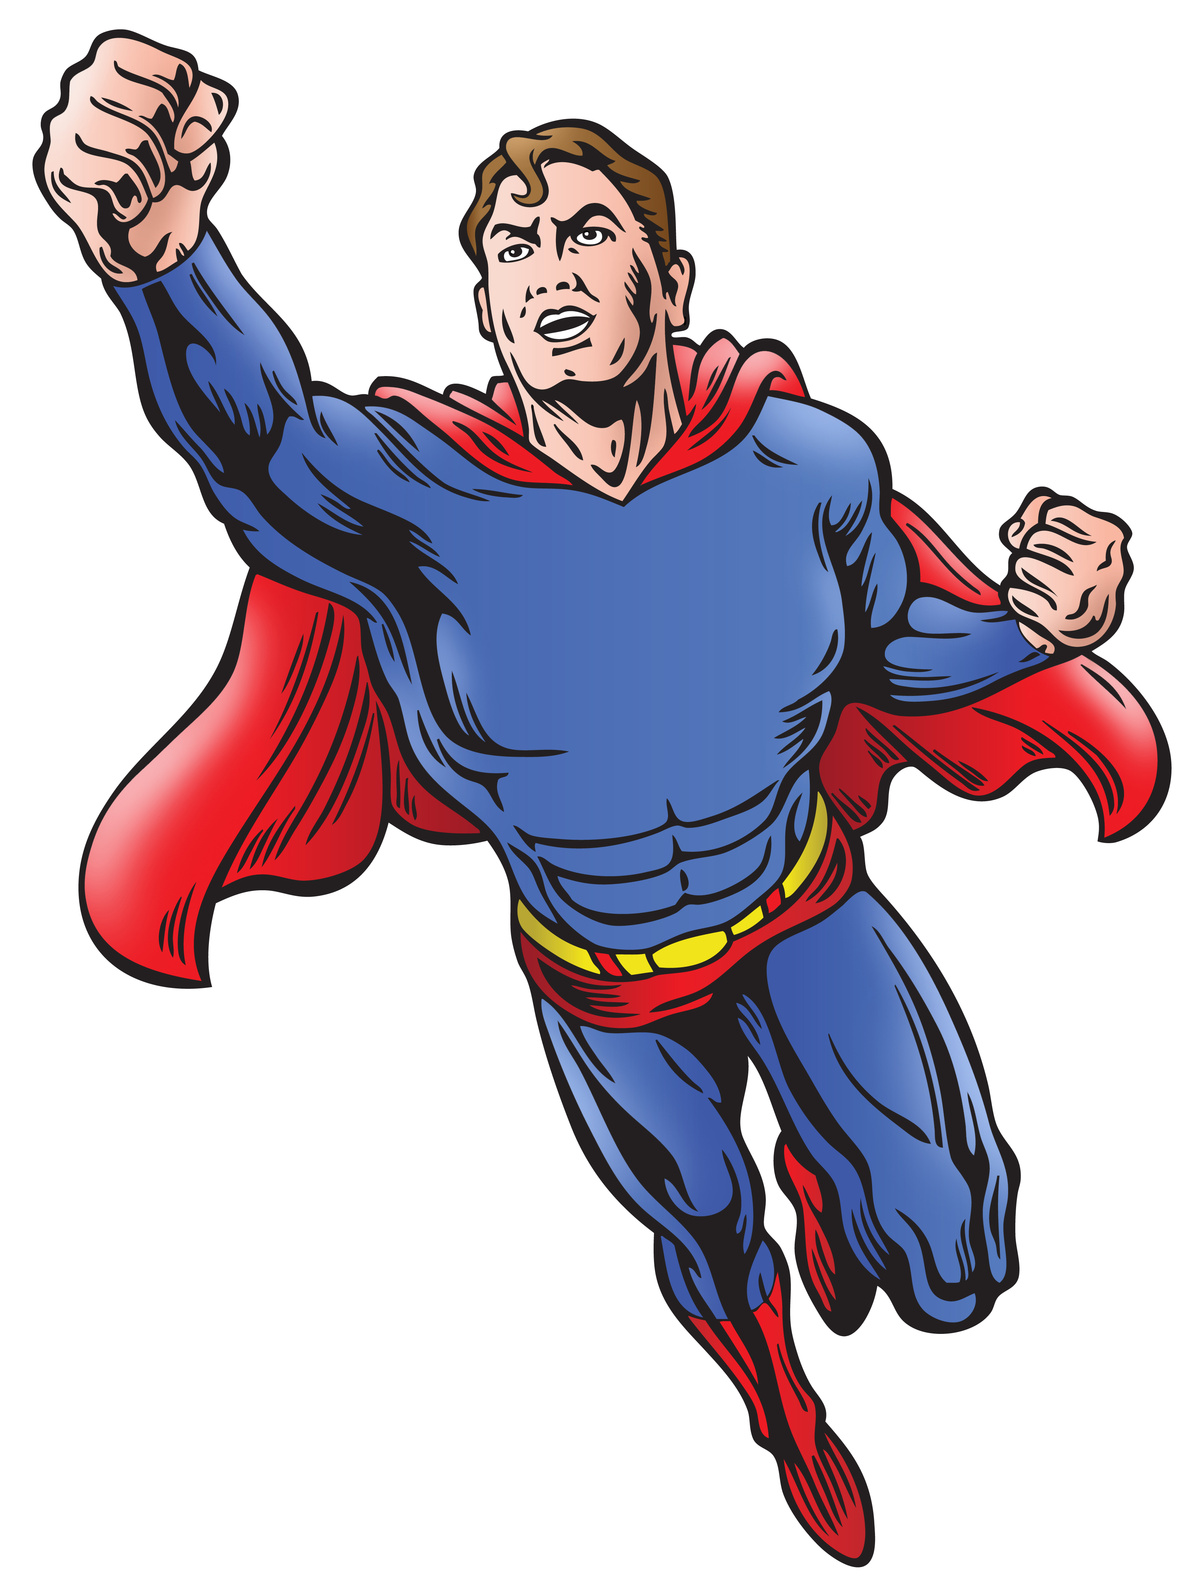 Be a hero and save investors from low yield, high risk investments